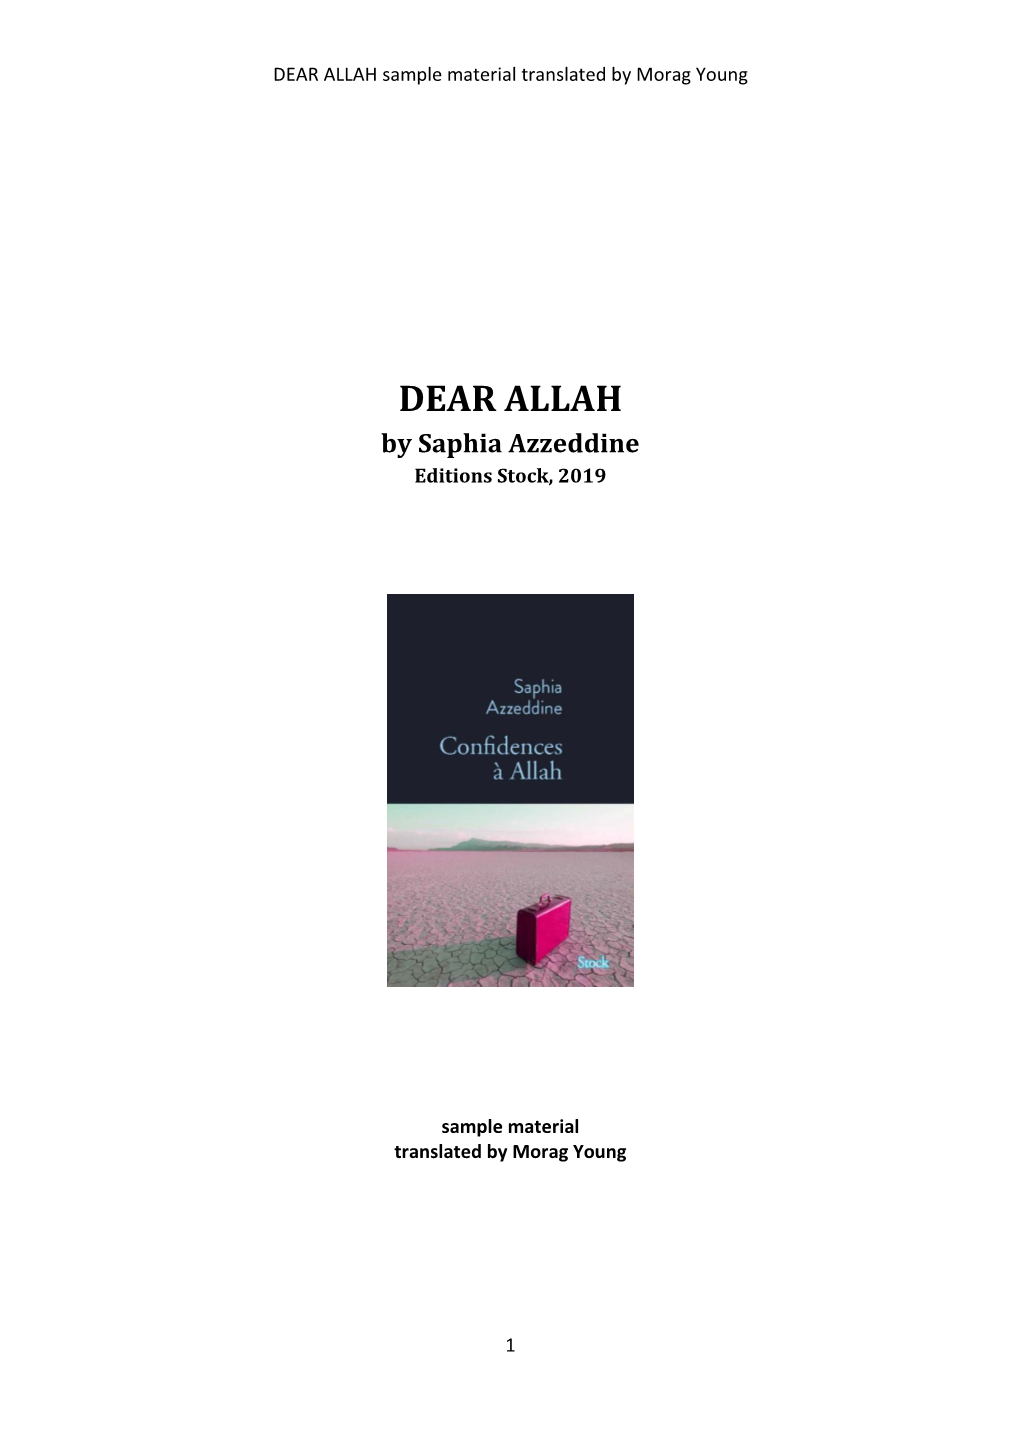 DEAR ALLAH Sample Material Translated by Morag Young